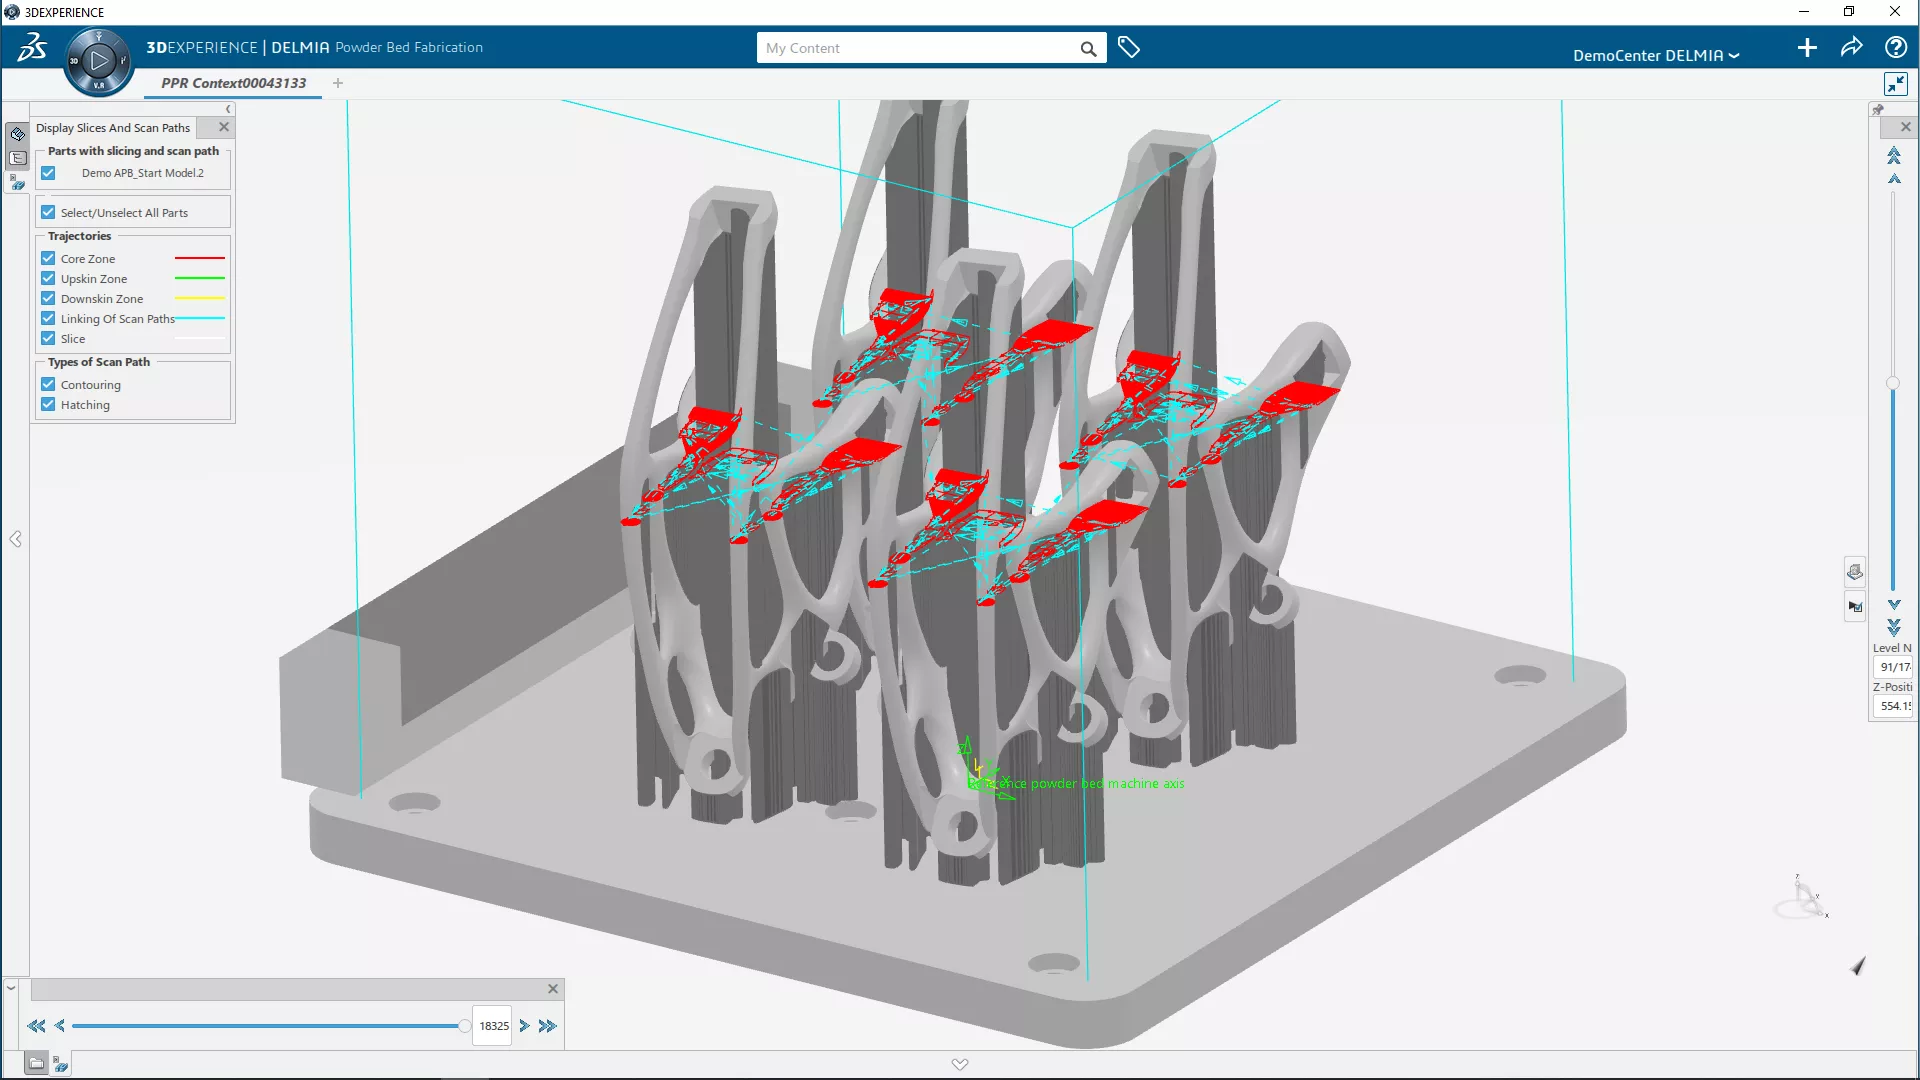 Learn More About 3DEXPERIENCE Additive Manufacturing